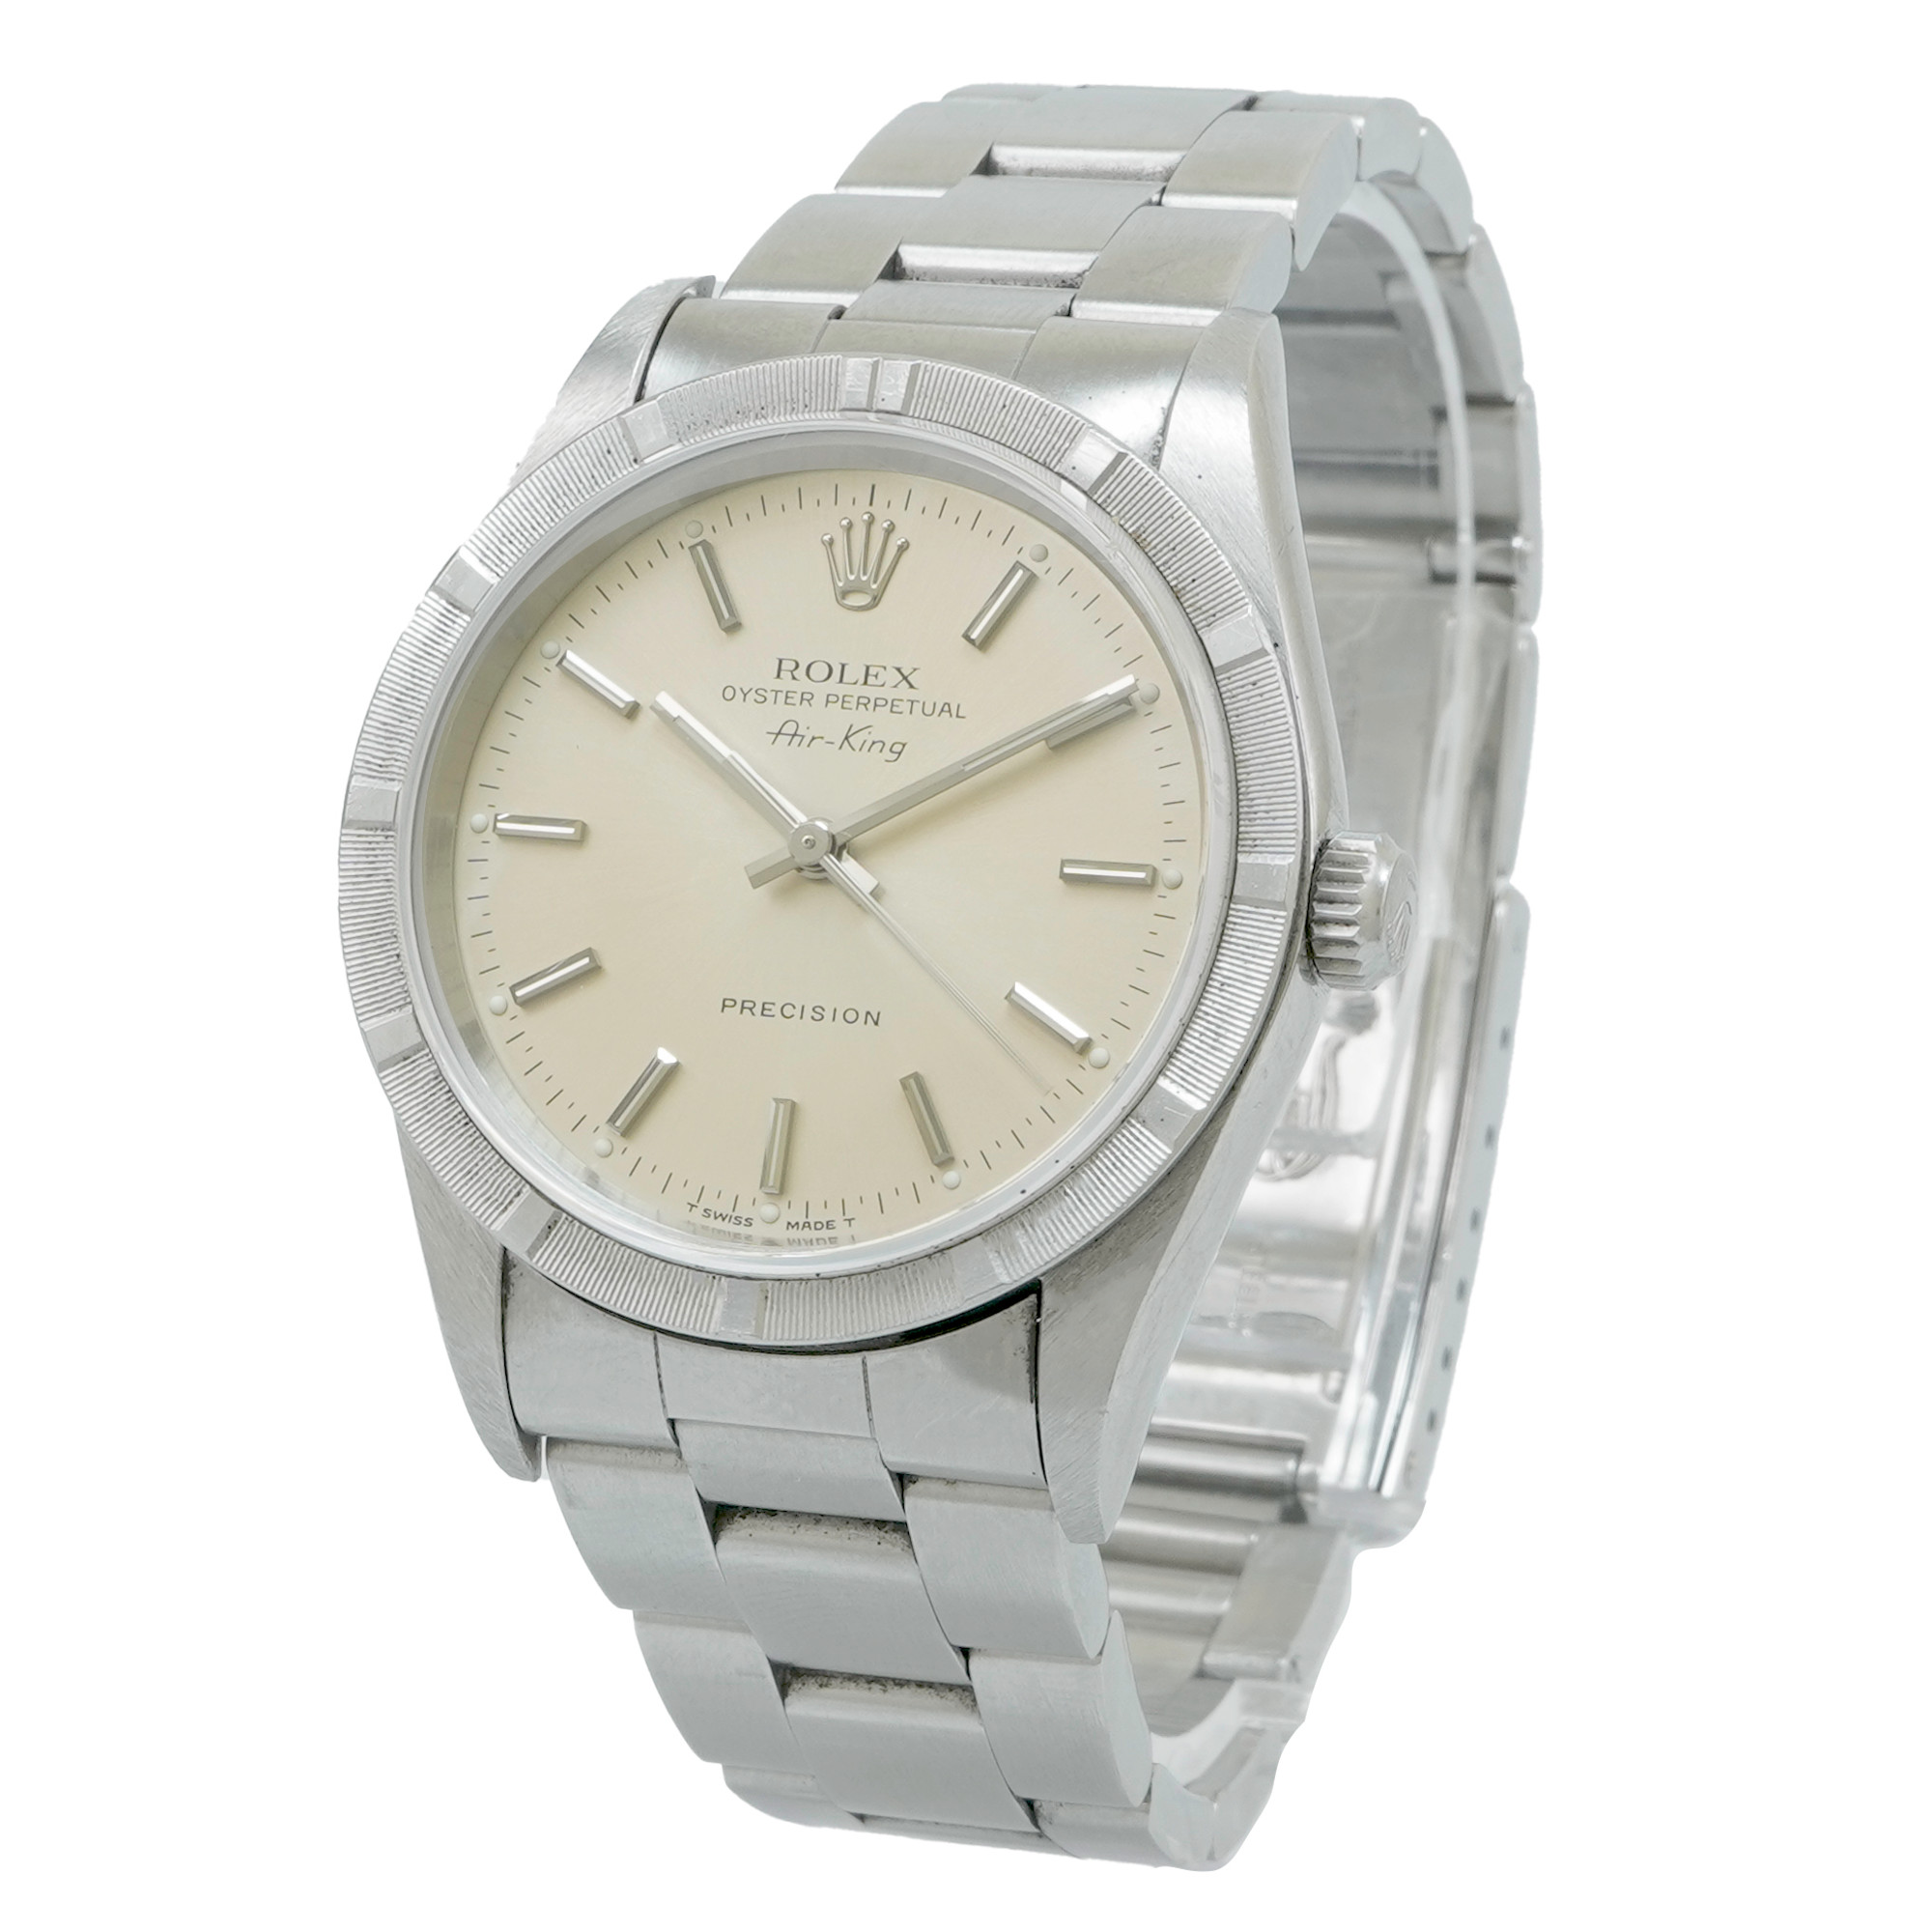 Rolex Airking Oyster Perpetual 14010 *1995* - Inventory 3861